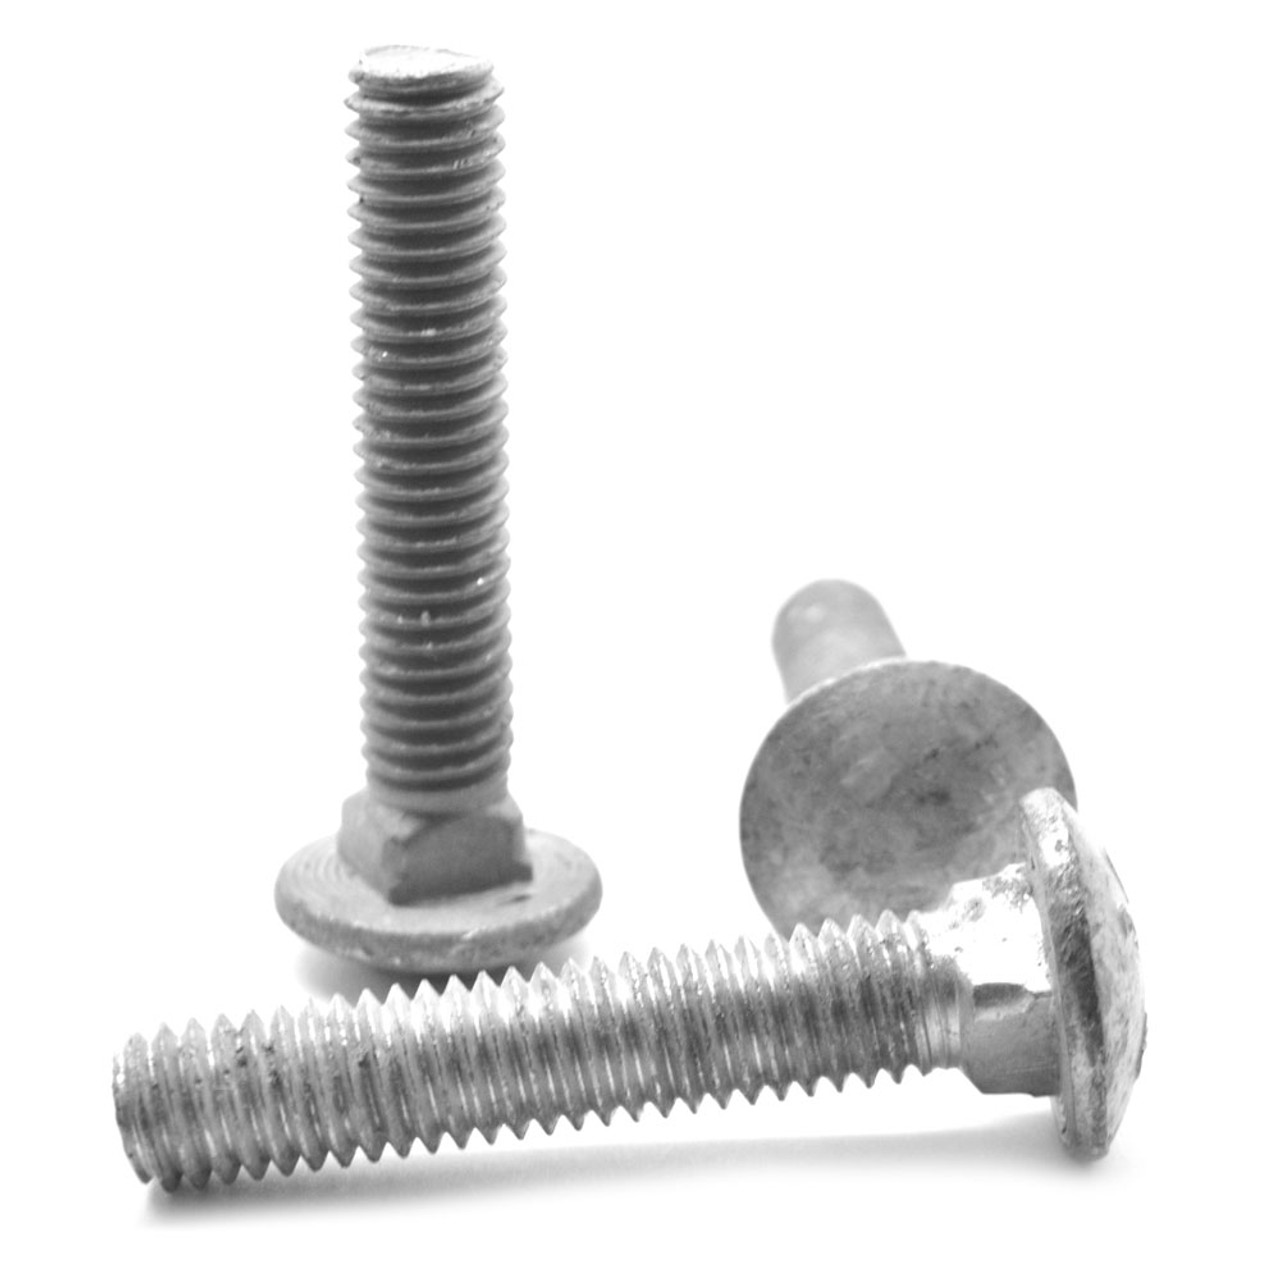 1/2"-13 x 2 1/2" (FT) Coarse Thread A307 Grade A Carriage Bolt Low Carbon Steel Hot Dip Galvanized